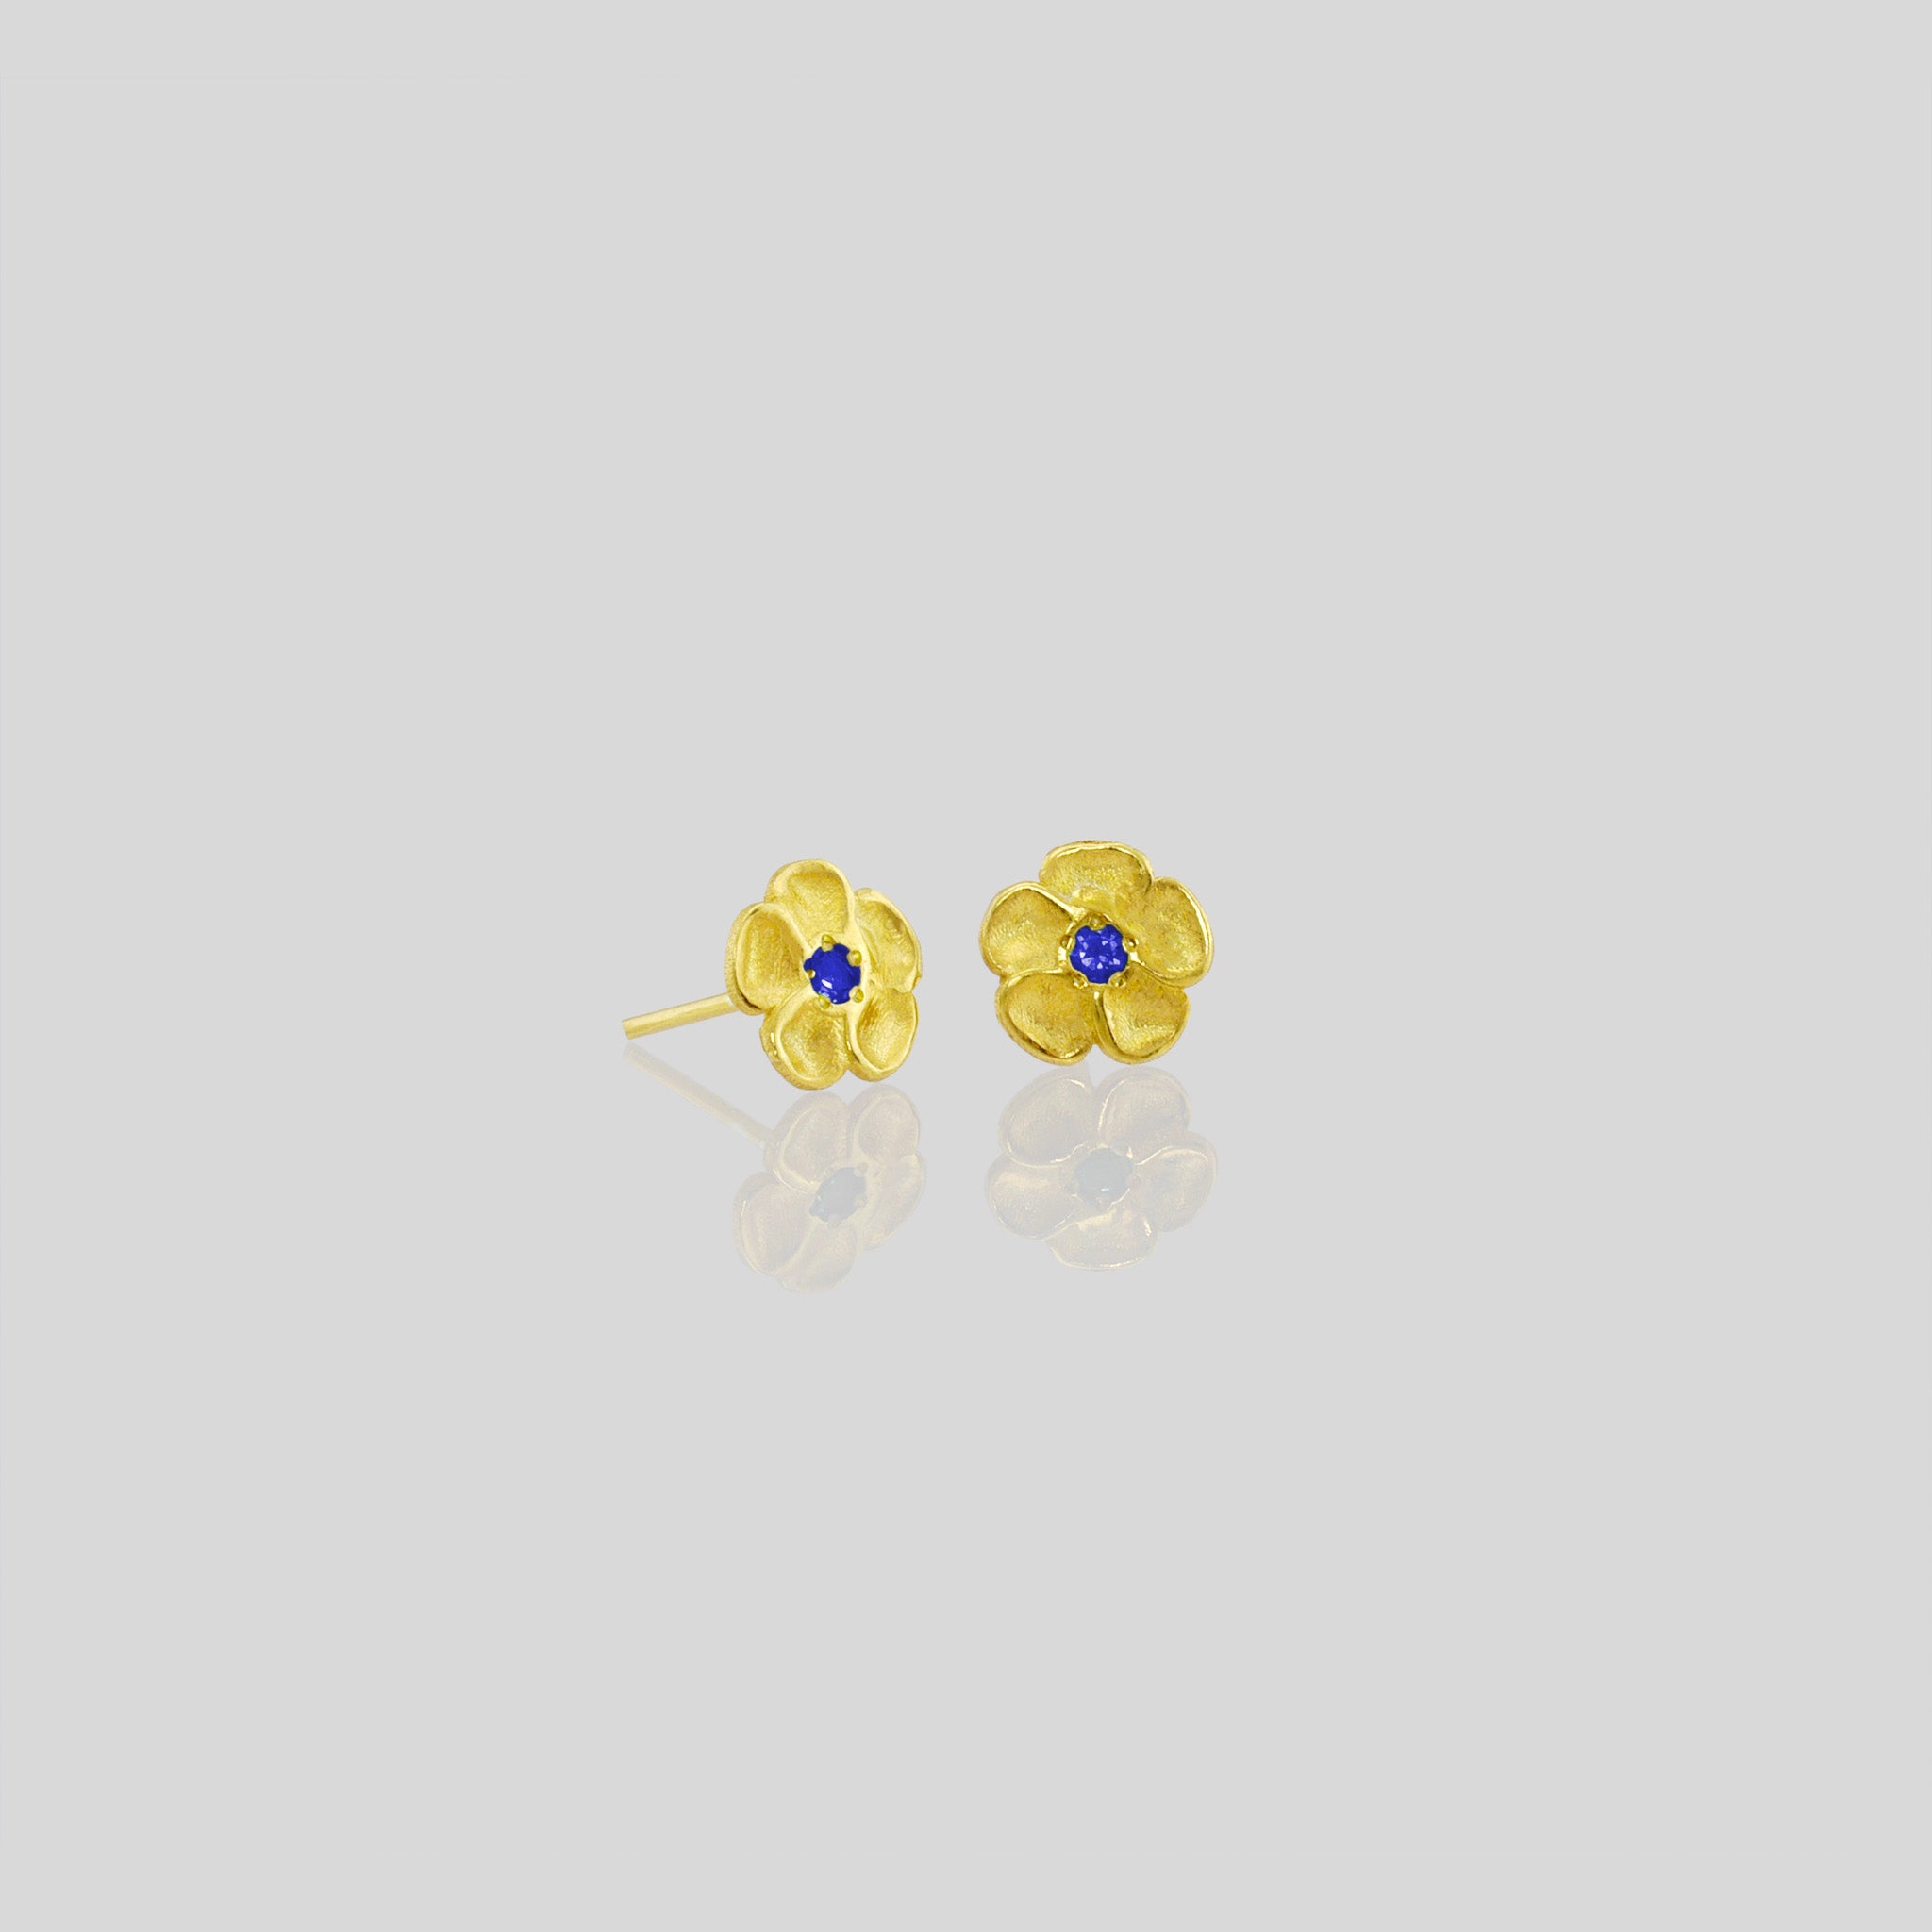 Delicate yellow gold flower stud earrings with a sparkling Sapphire center. Perfect for any occasion!